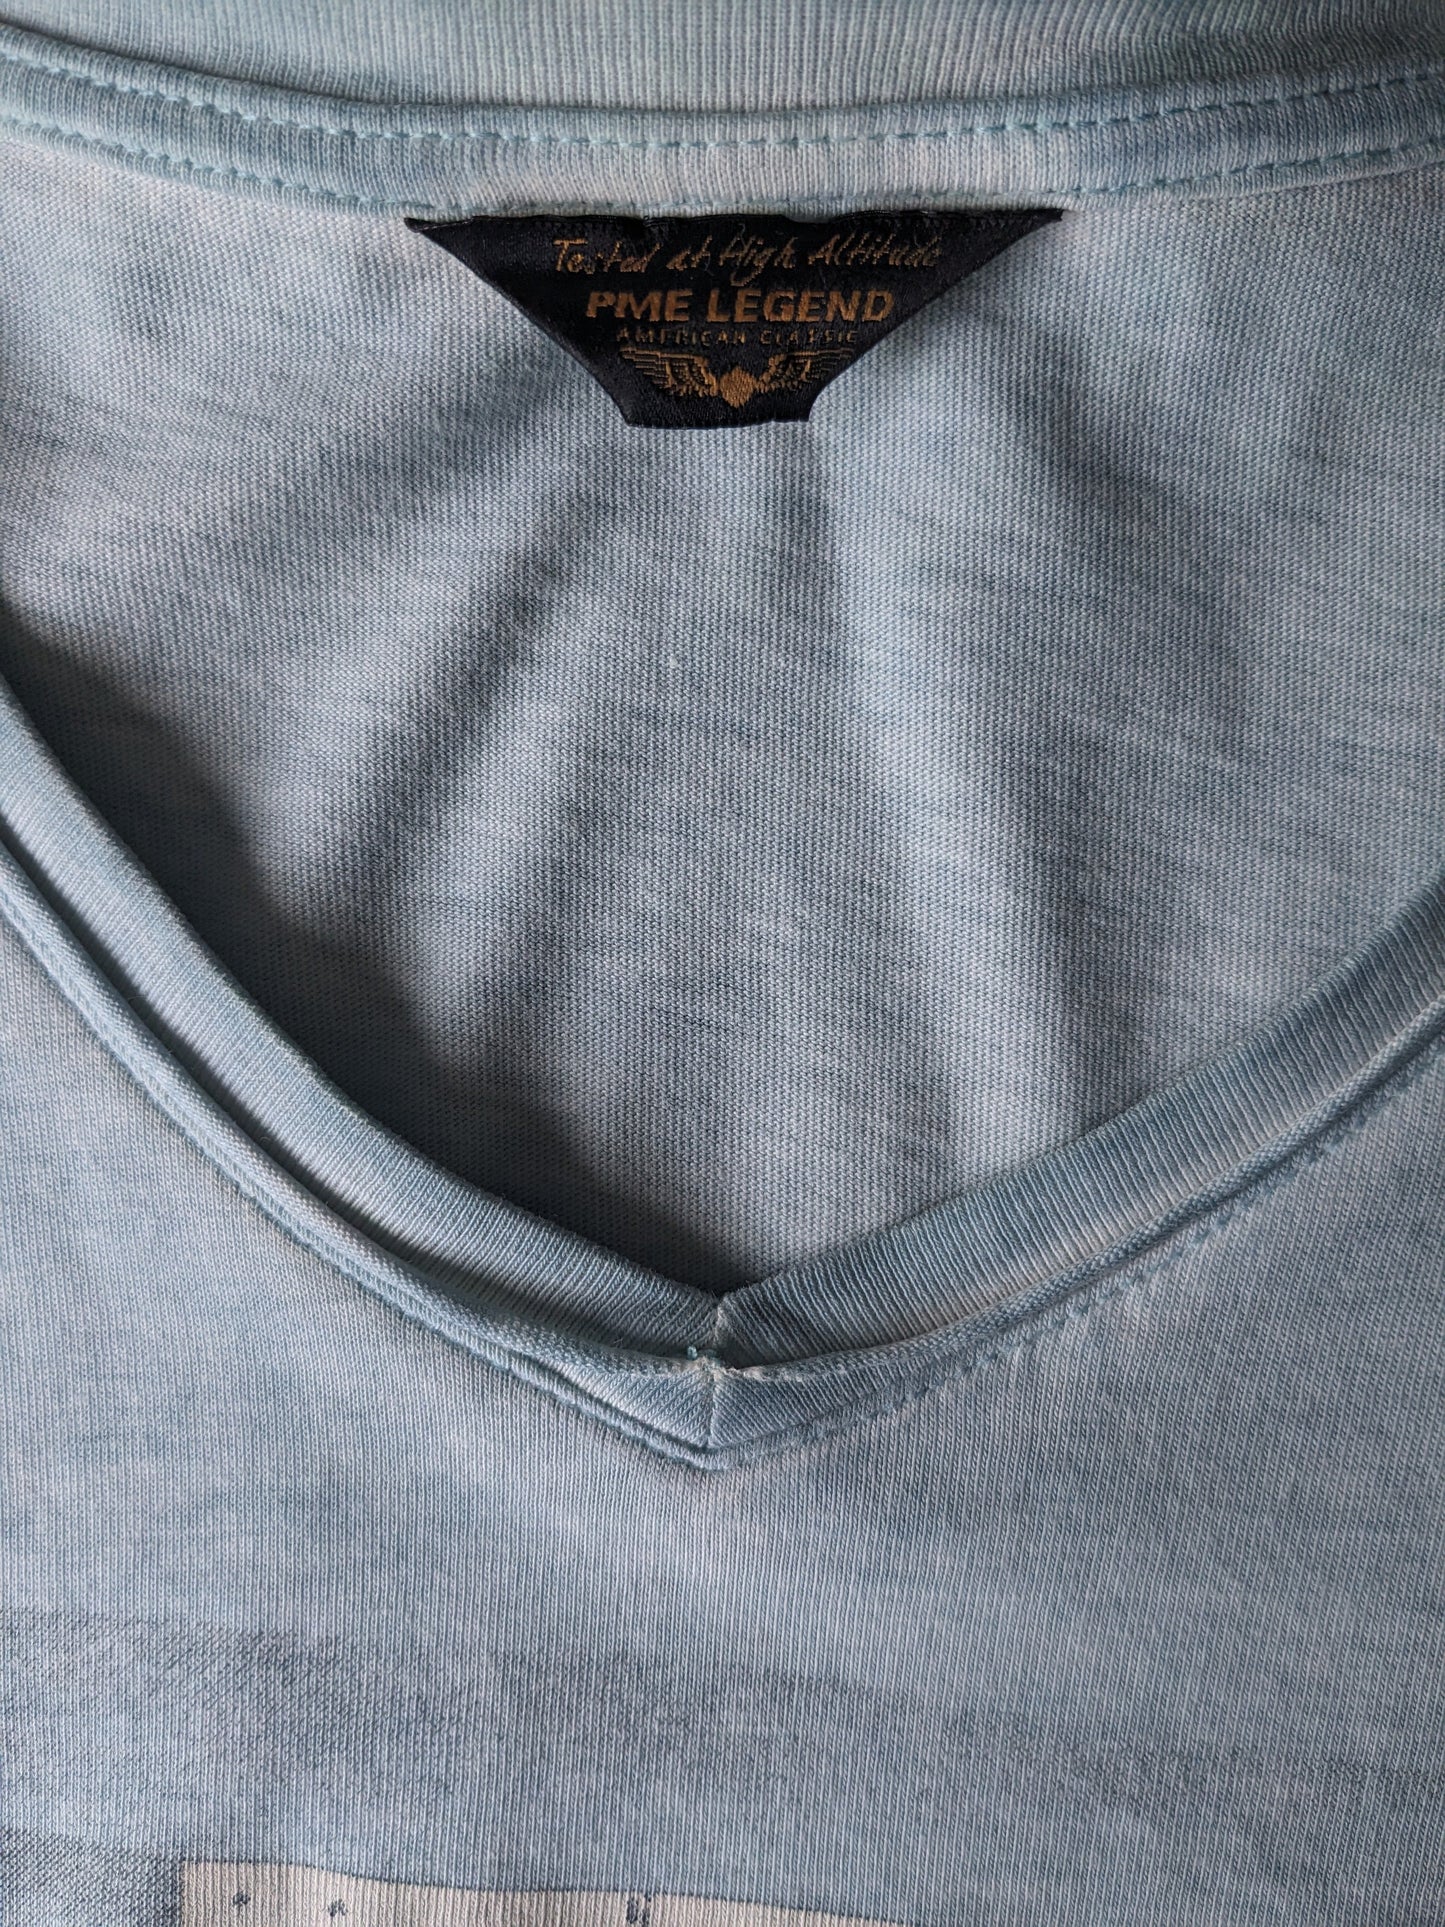 PME Legend shirt with V-neck. Light blue mixed with print. Size L.